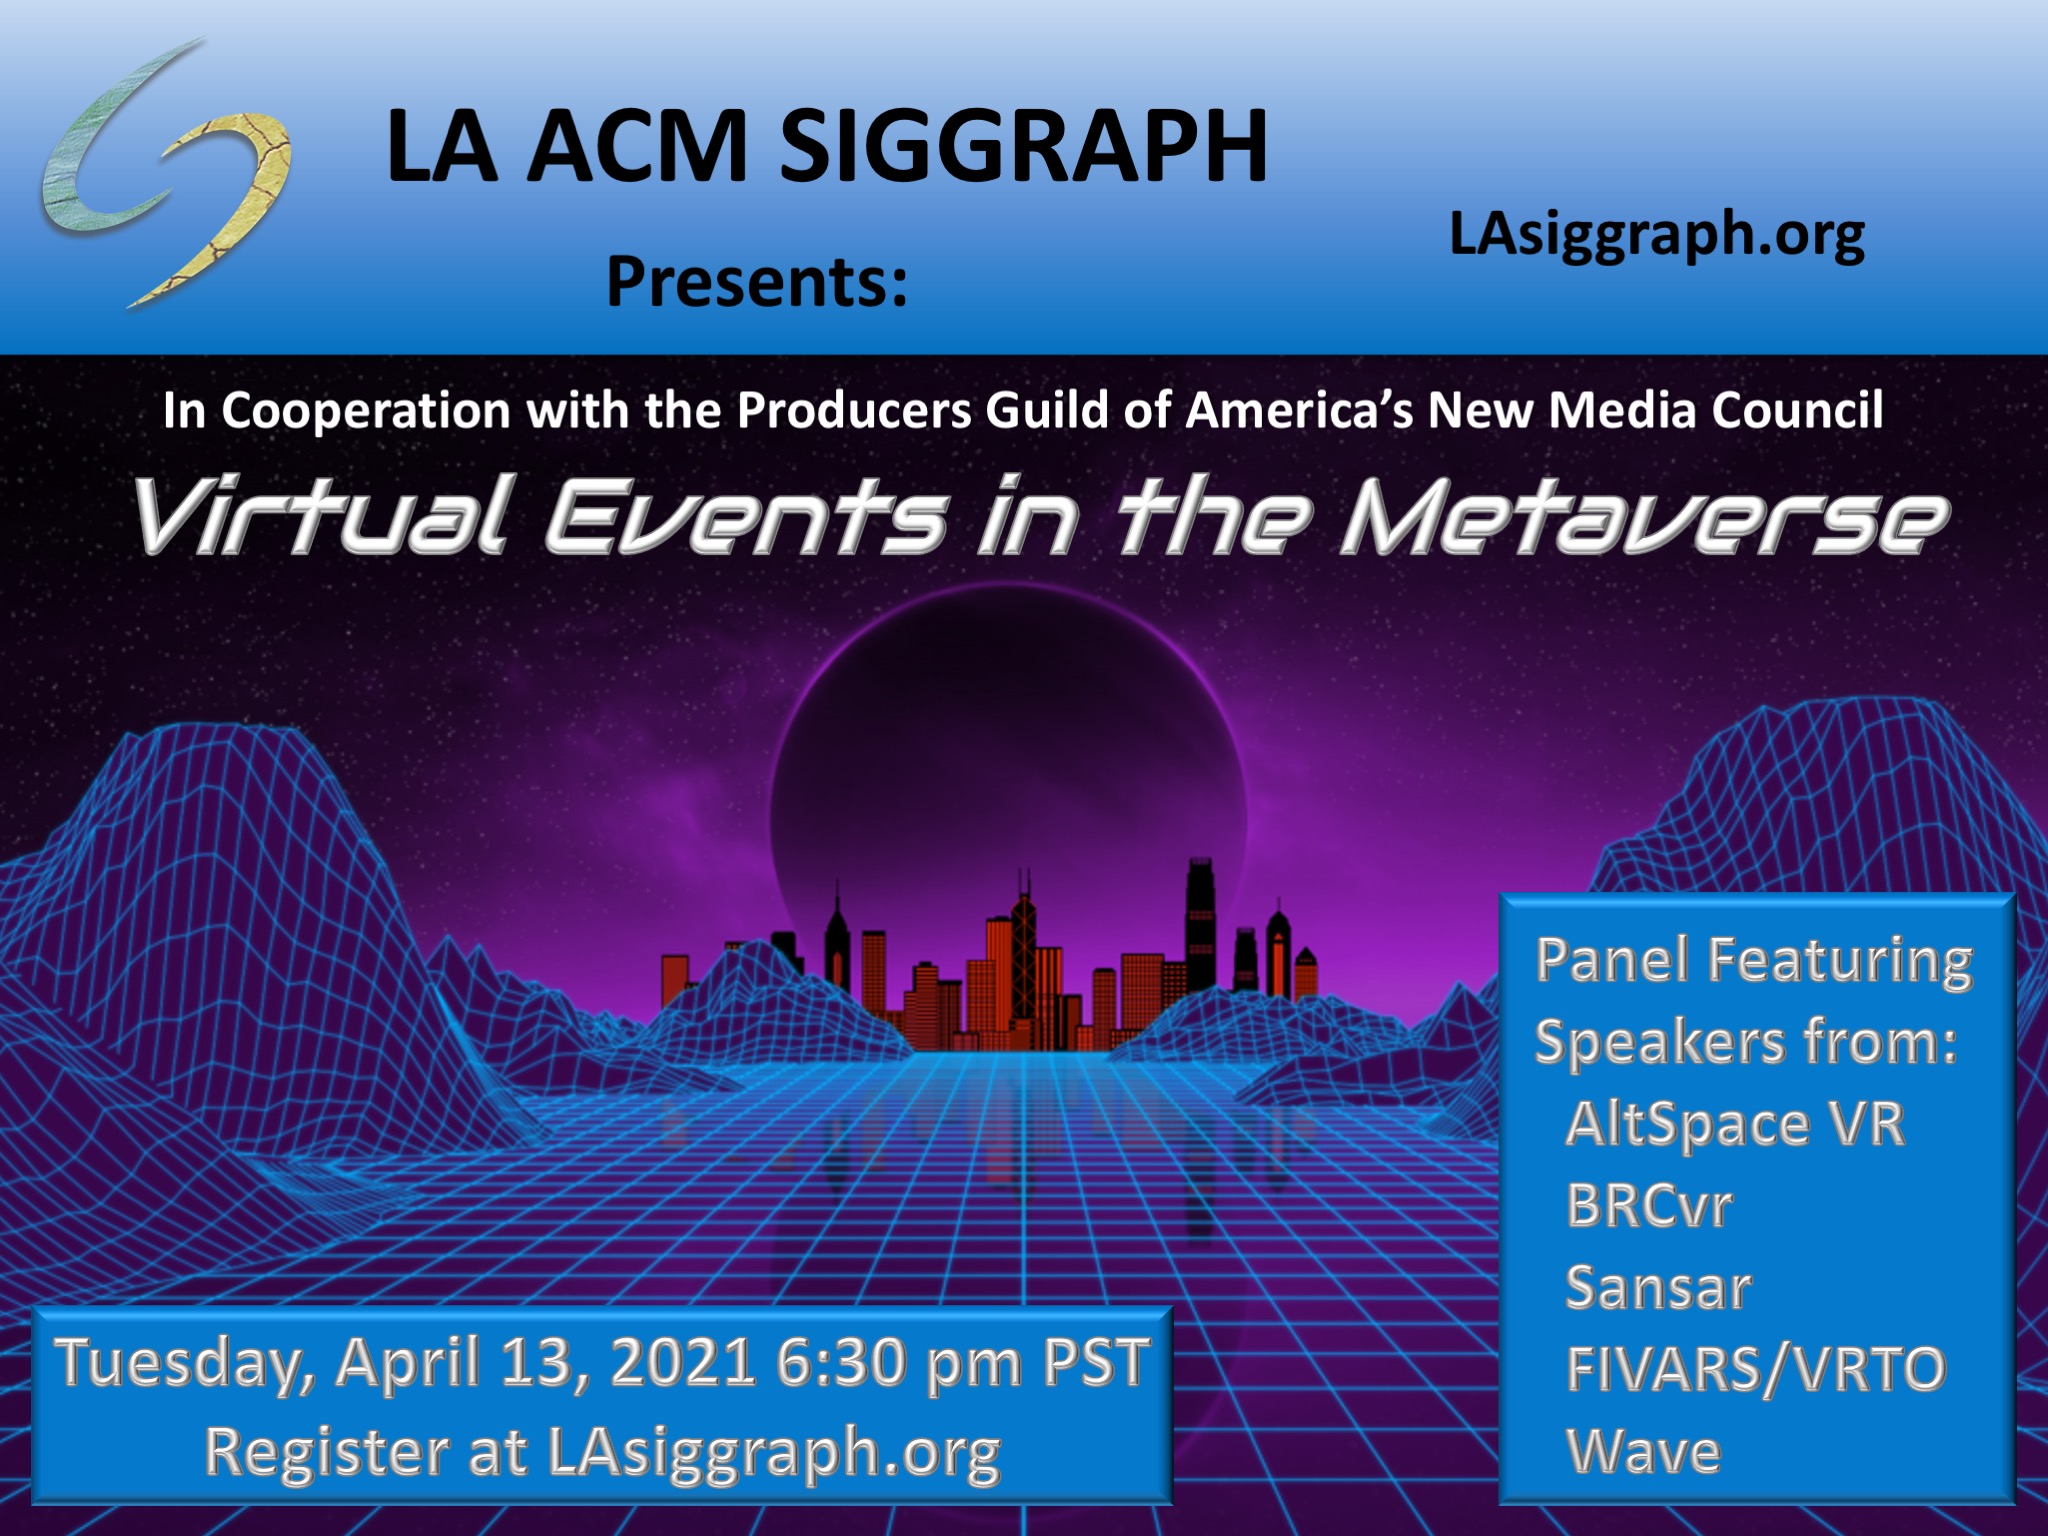 Virtual Events in the Metaverse | LA ACM SIGGRAPH